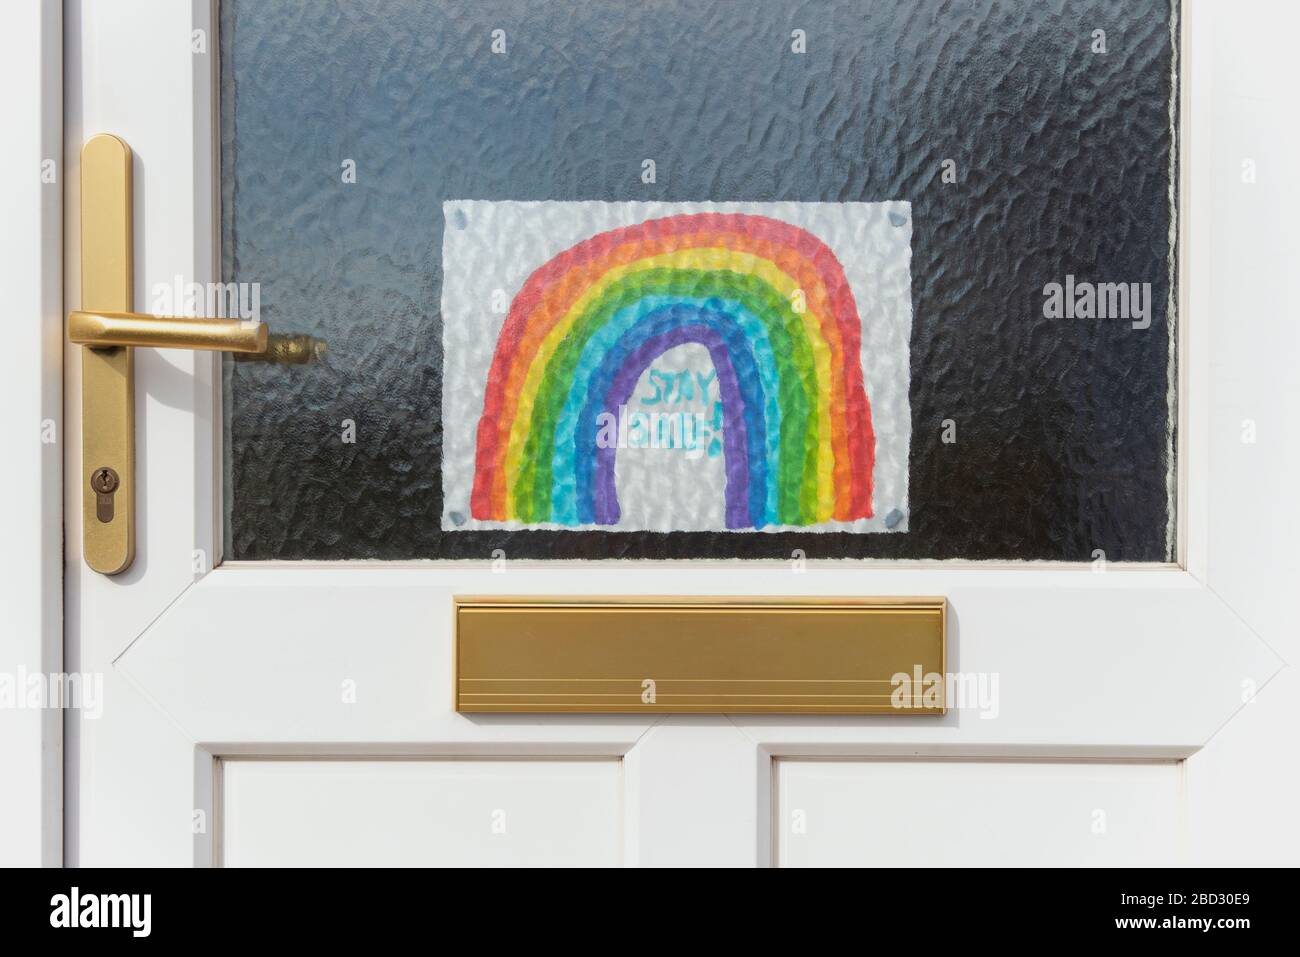 Drawing of a rainbow stuck to a front door during the Covid-19 pandemic of 2020, encouraging people to stay safe by staying at home, by Anna Anderson Stock Photo